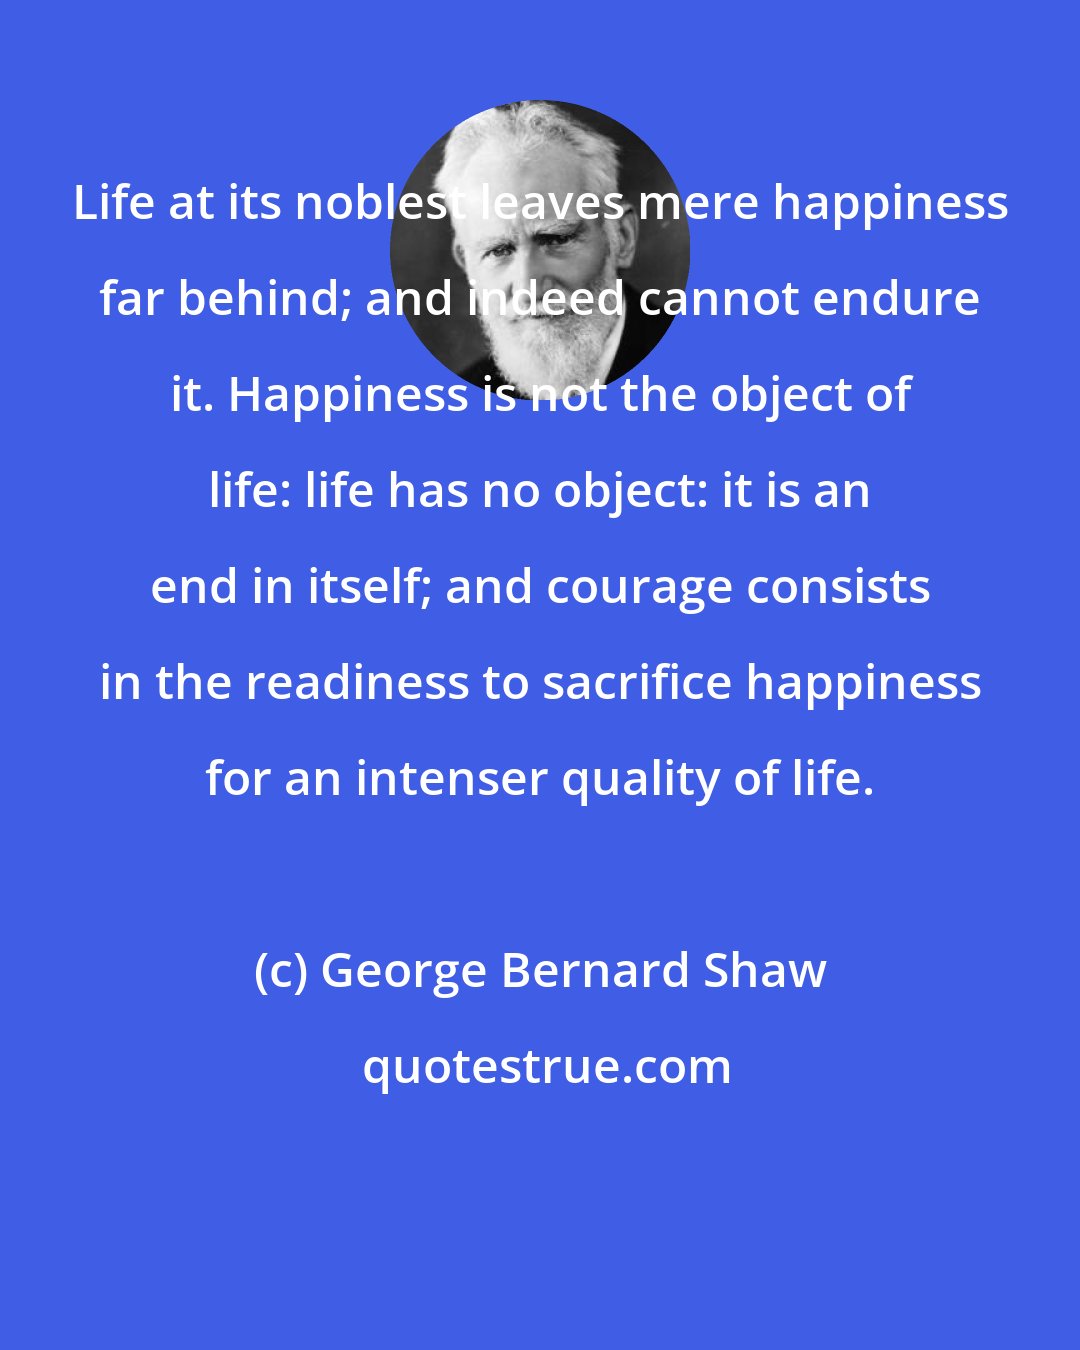 George Bernard Shaw: Life at its noblest leaves mere happiness far behind; and indeed cannot endure it. Happiness is not the object of life: life has no object: it is an end in itself; and courage consists in the readiness to sacrifice happiness for an intenser quality of life.